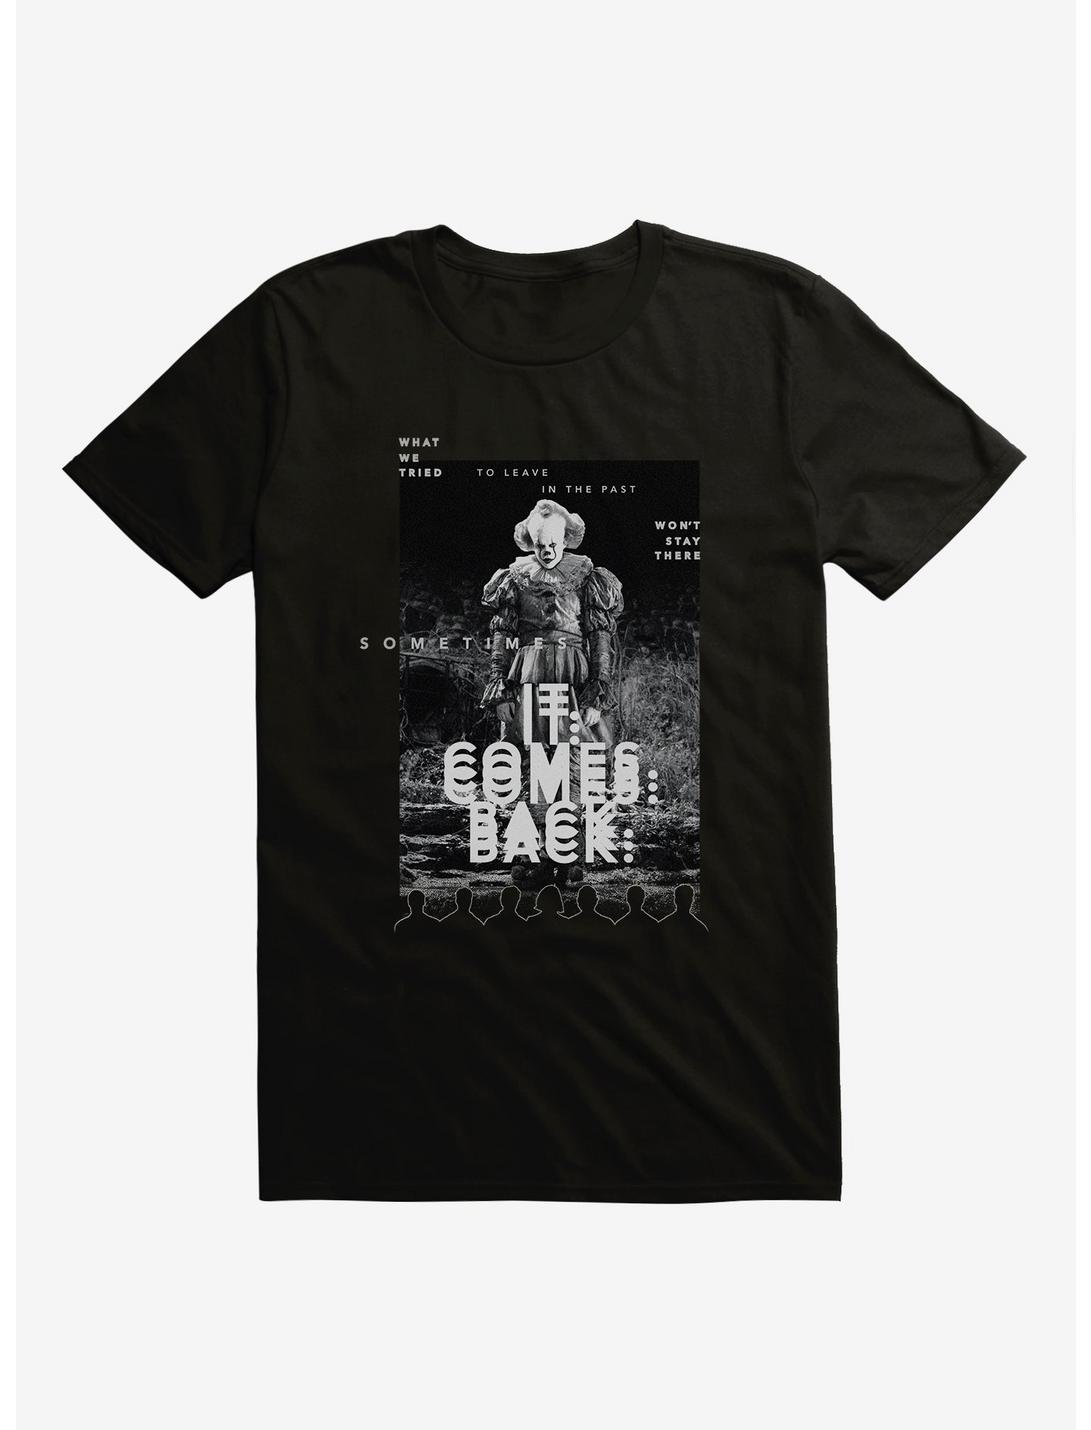 IT Chapter Two IT Comes Back Poster T-Shirt, BLACK, hi-res